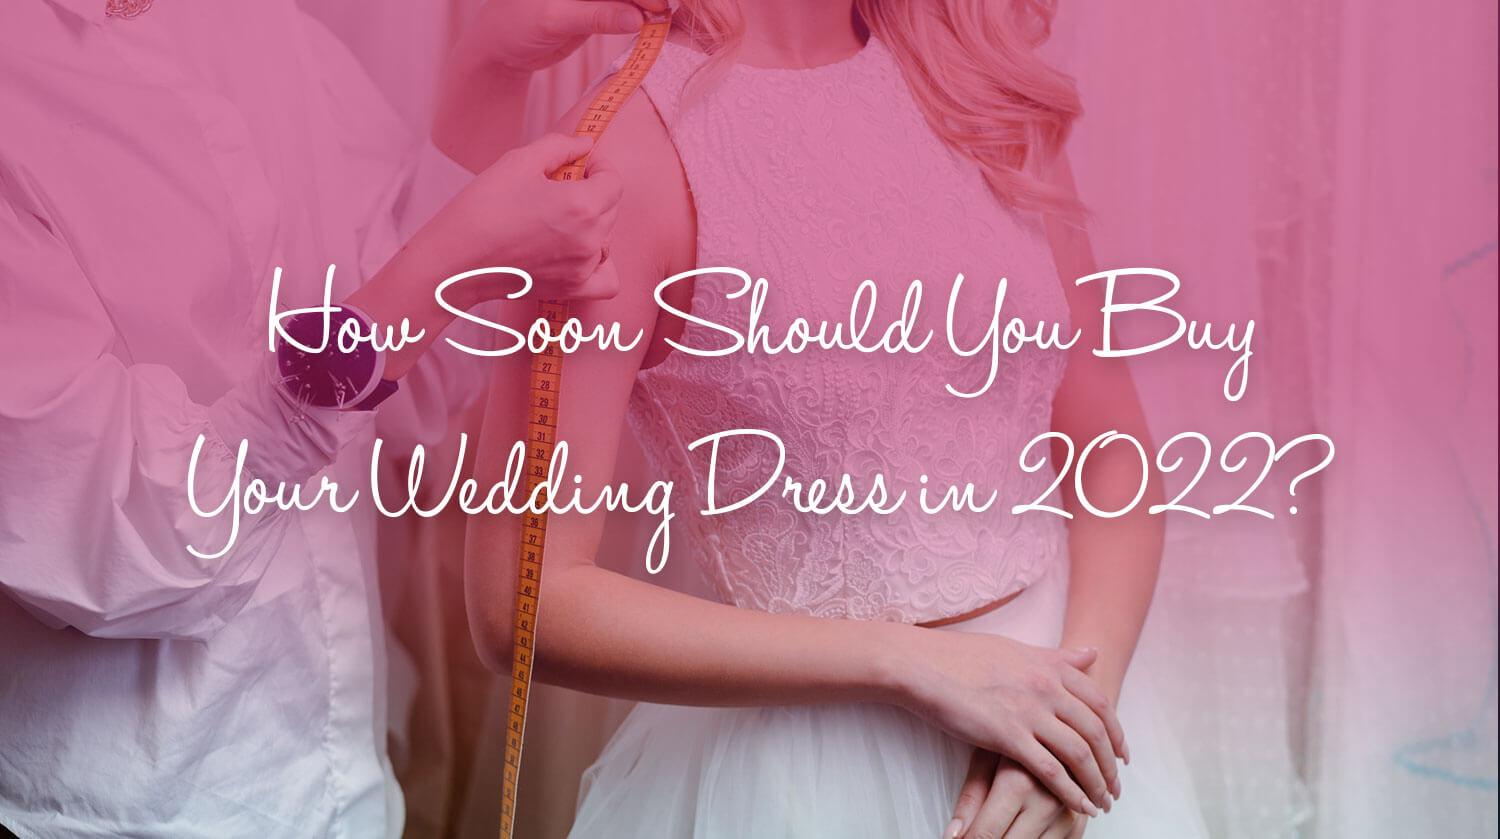 How Soon Should You Buy Your Wedding Dress in 2022?